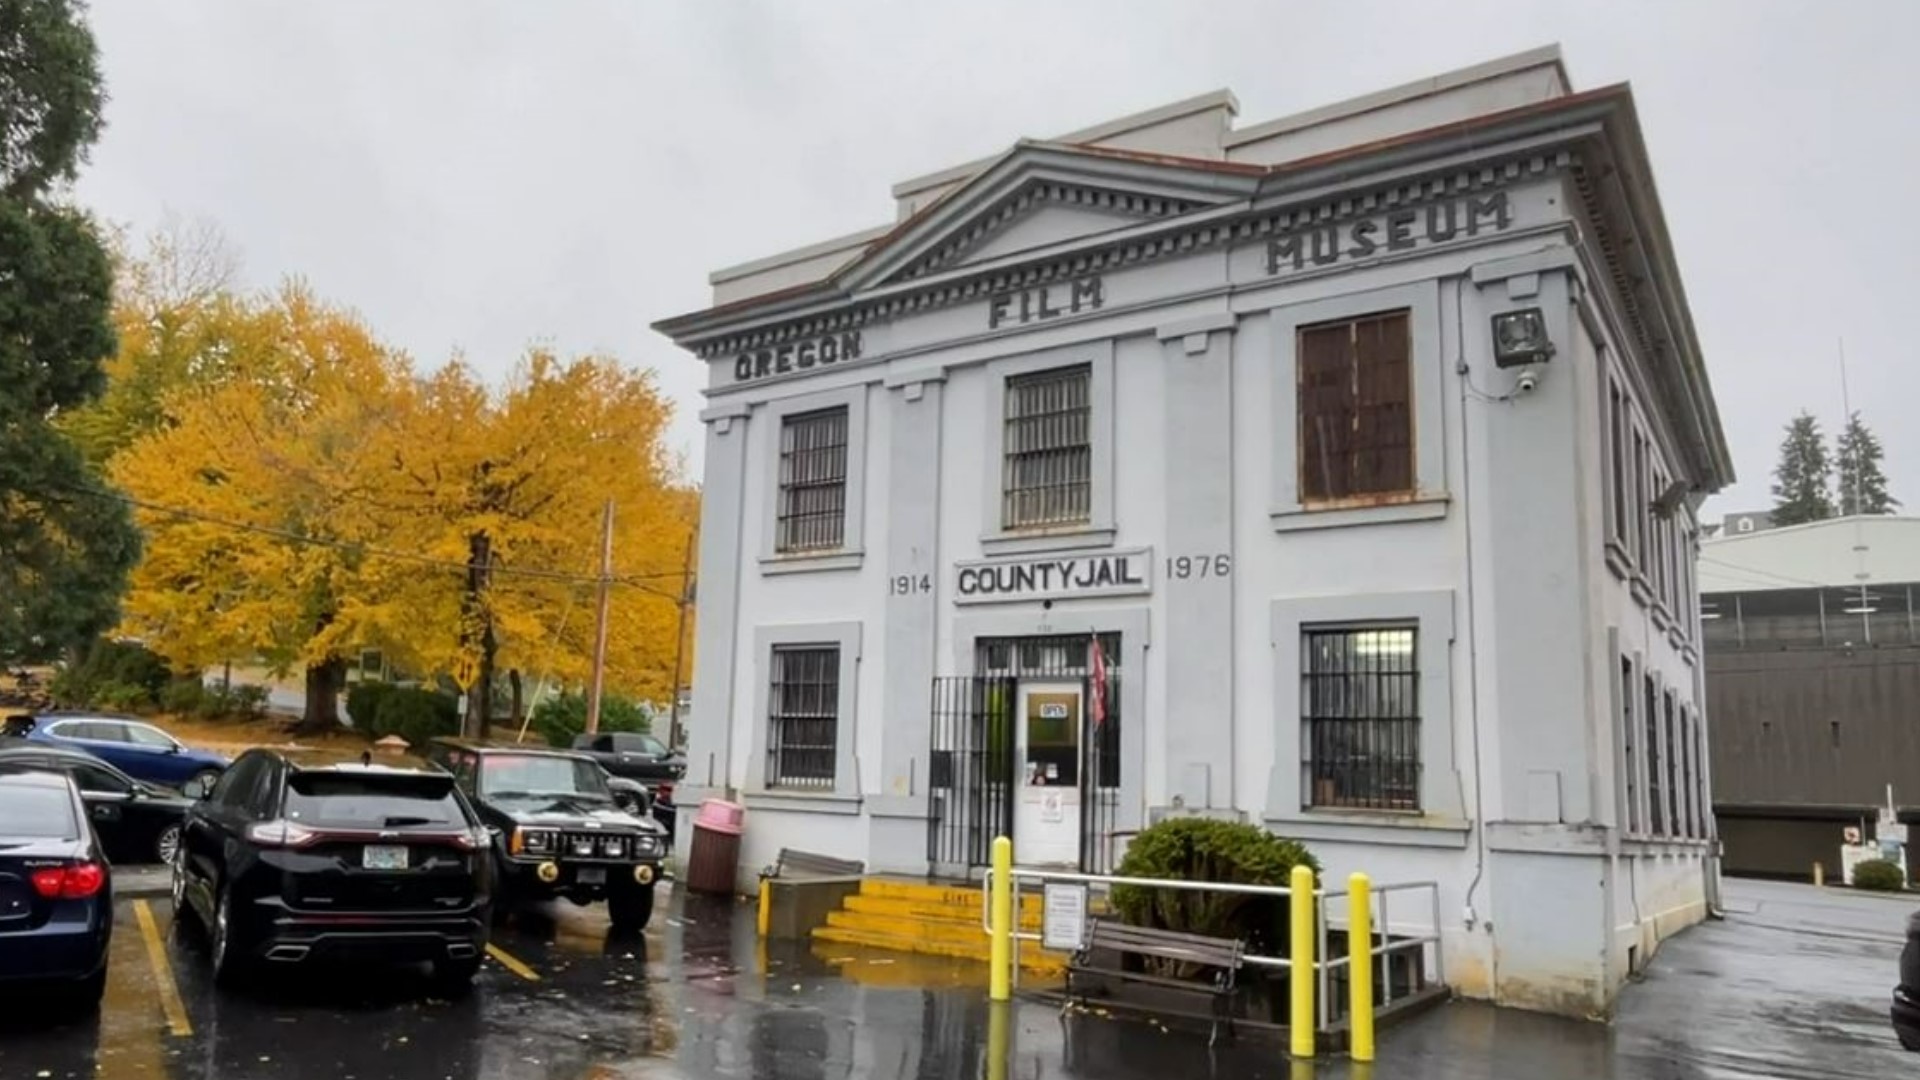 The old Clatsop County Jail and "Goonies" film location now houses the Oregon Film Museum. #k5evening